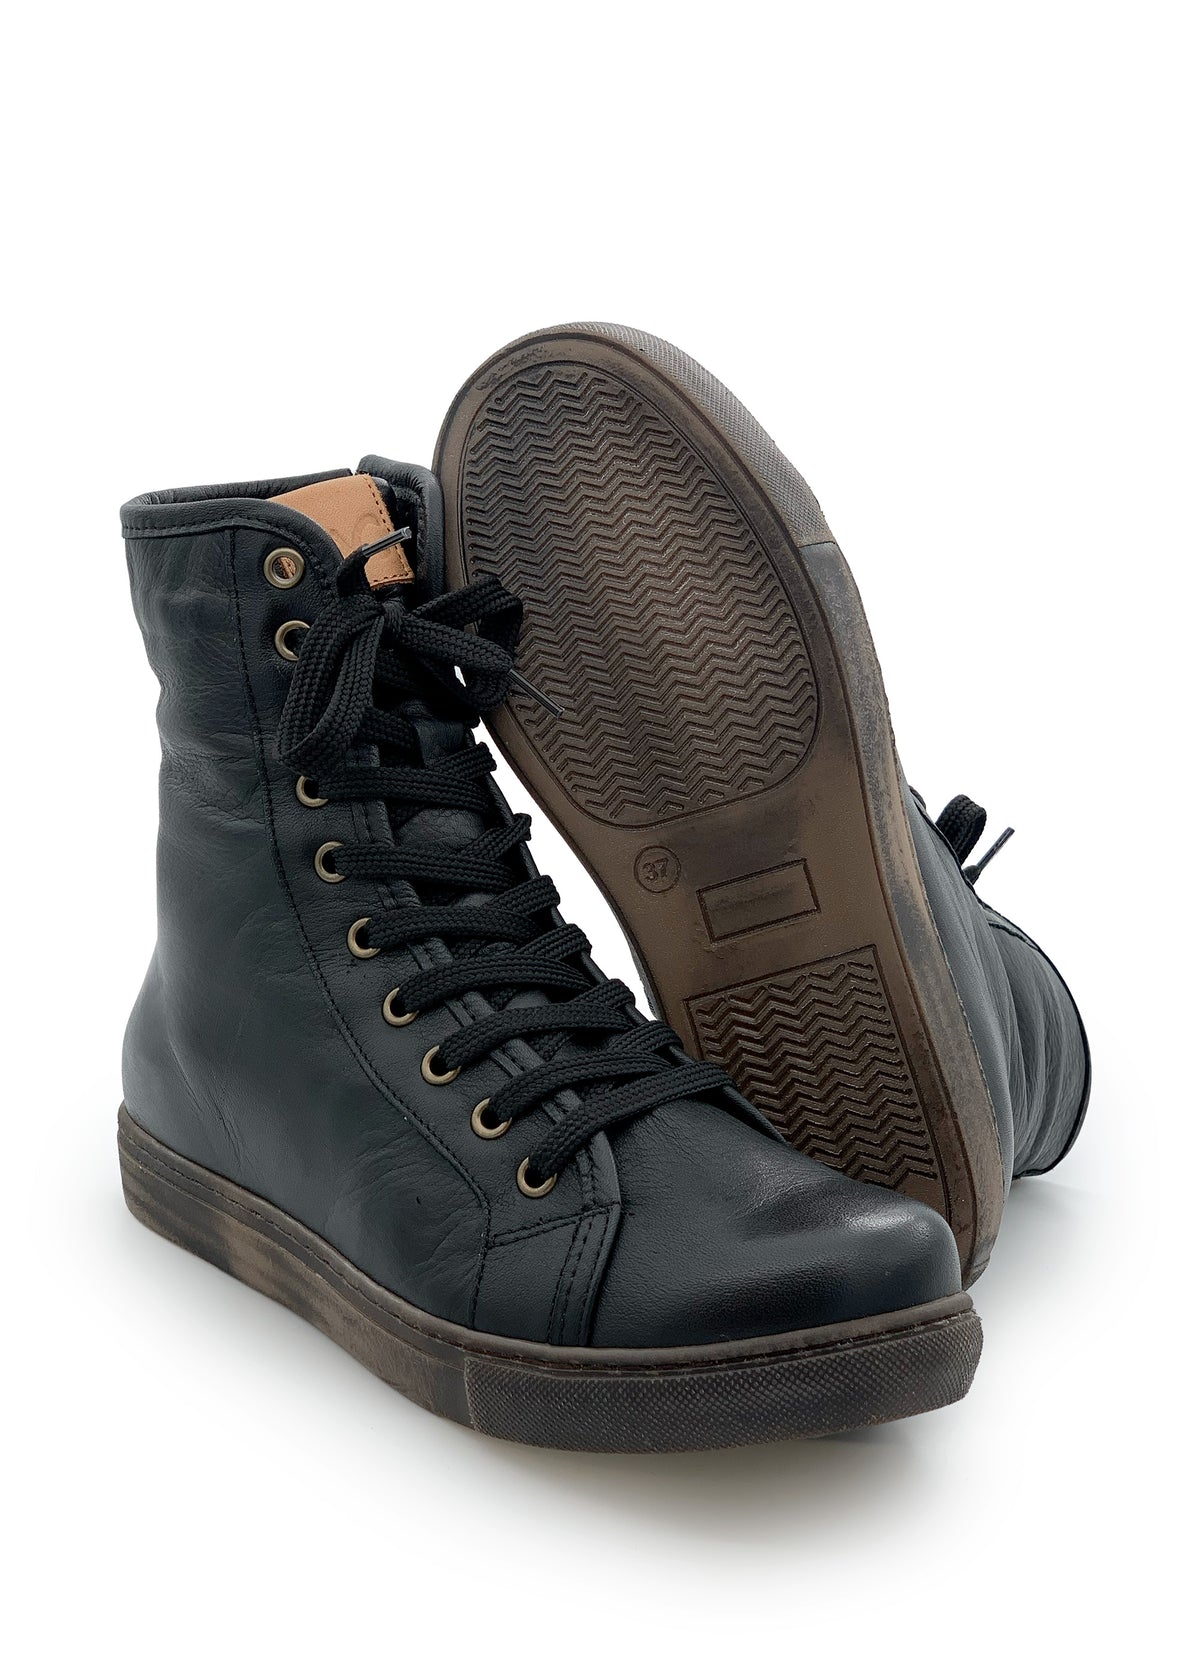 Winter ankle boots - black, brown sole